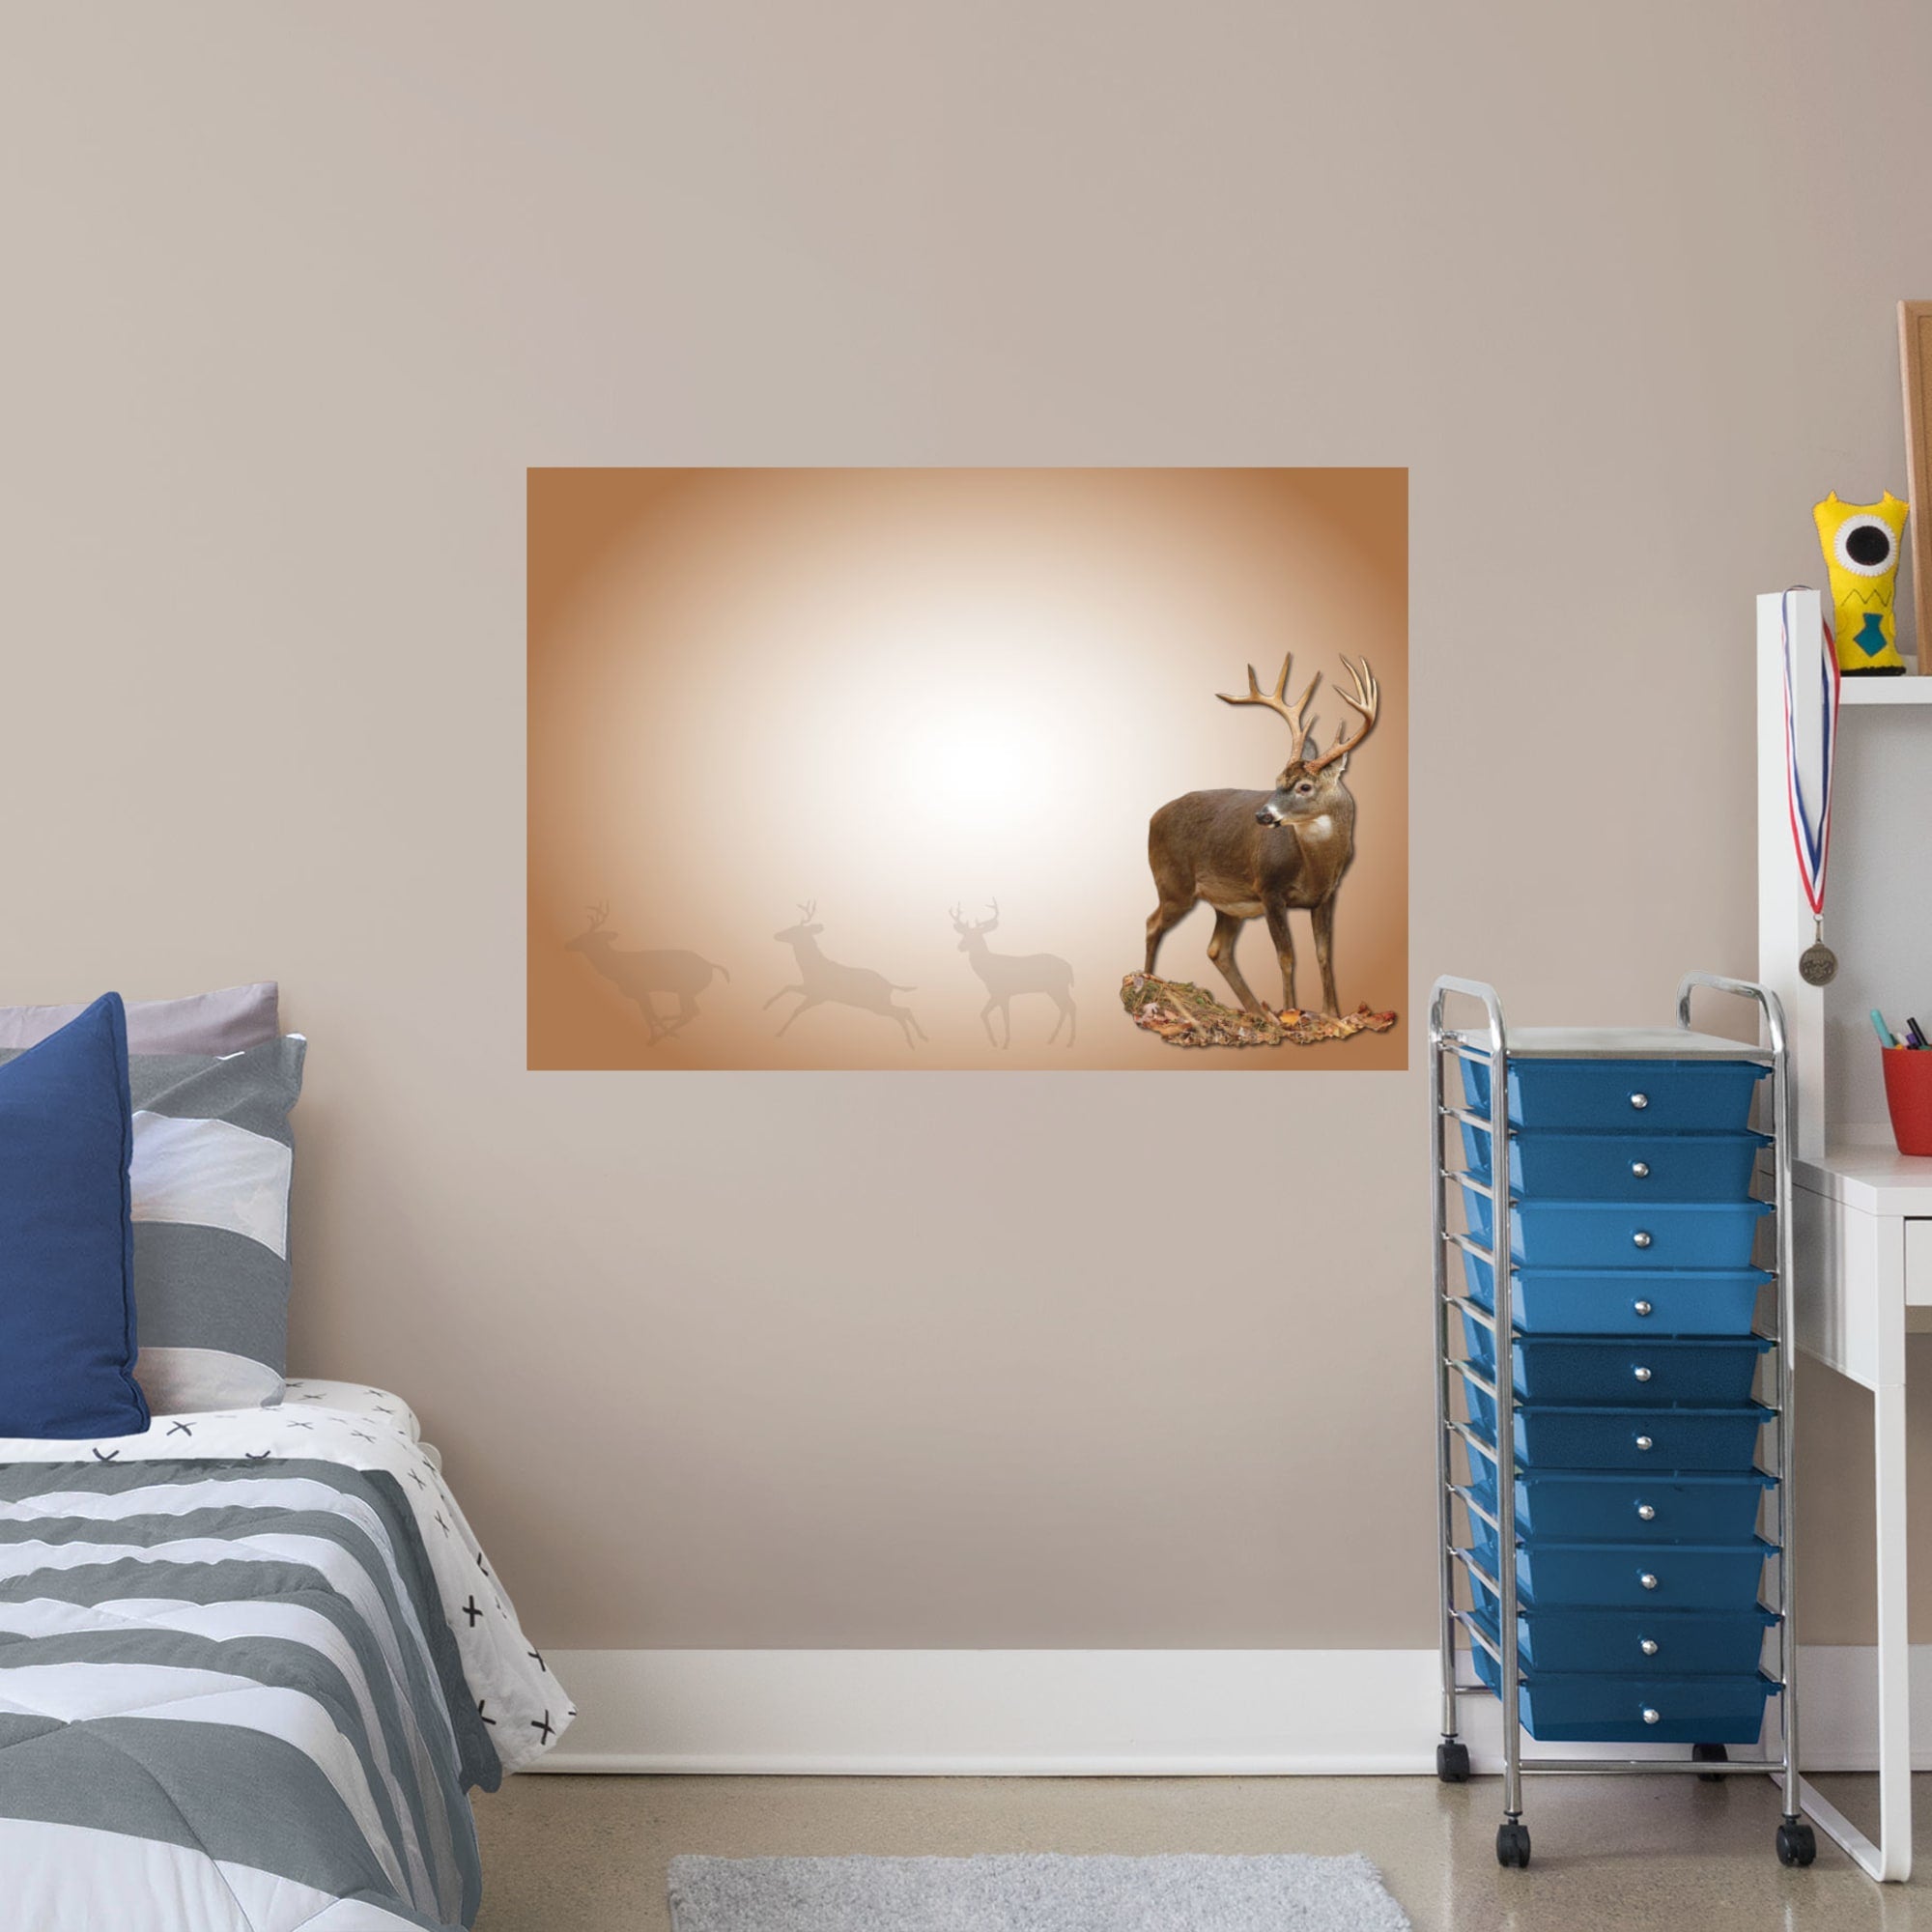 Whiteboard: Deer - Removable Dry Erase Vinyl Decal 38.0"W x 26.0"H by Fathead